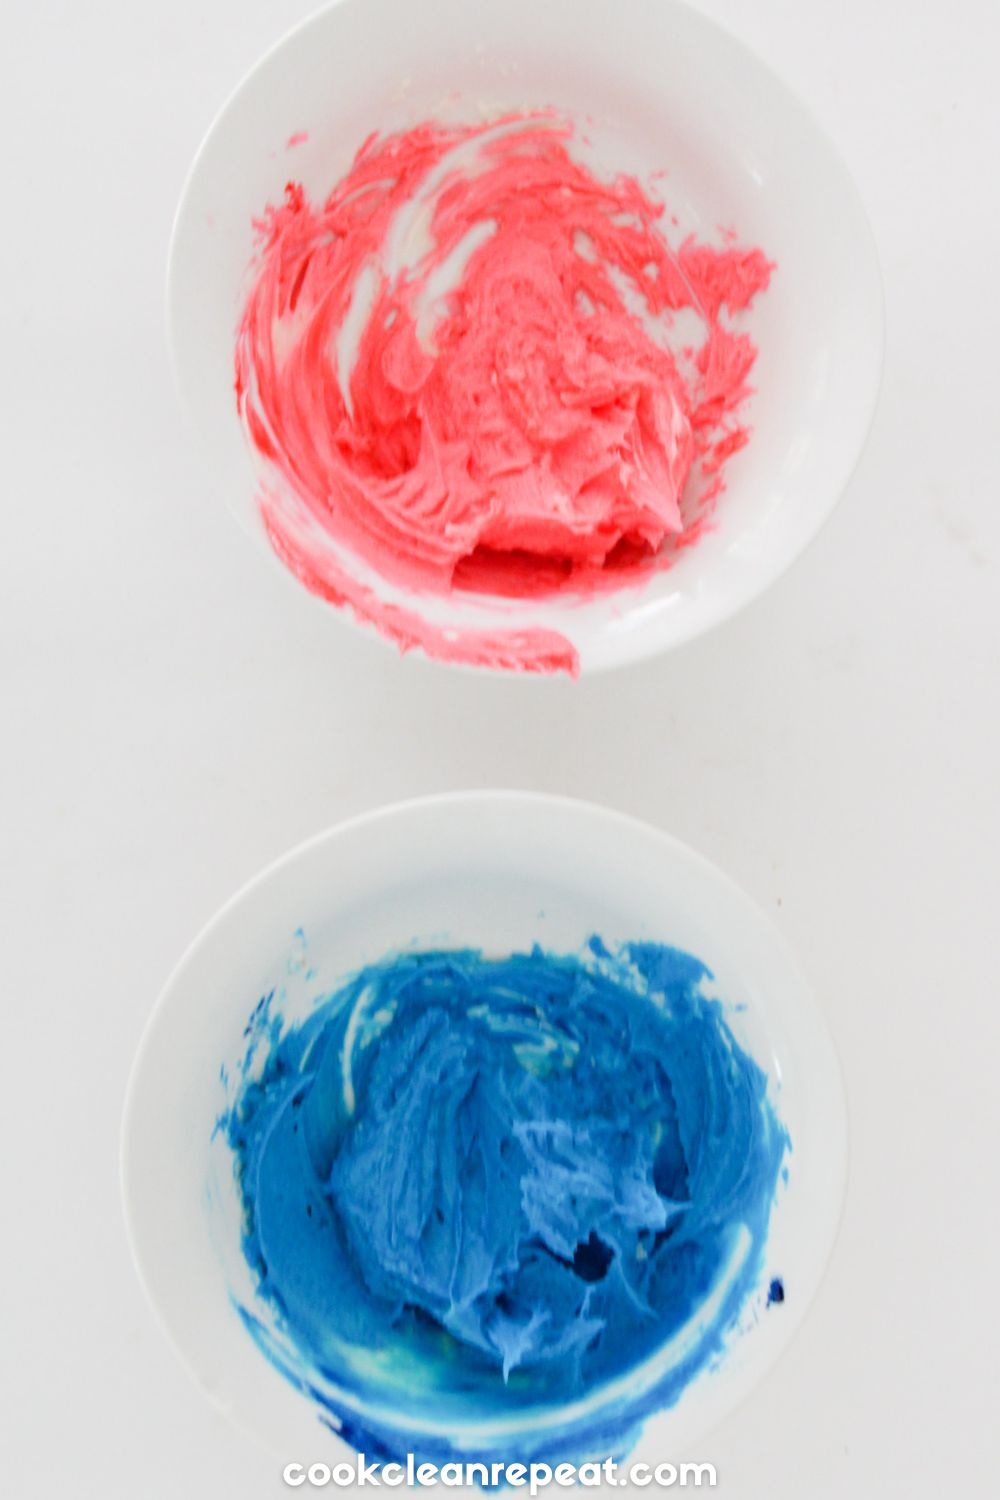 icing colored in with pink and blue coloring